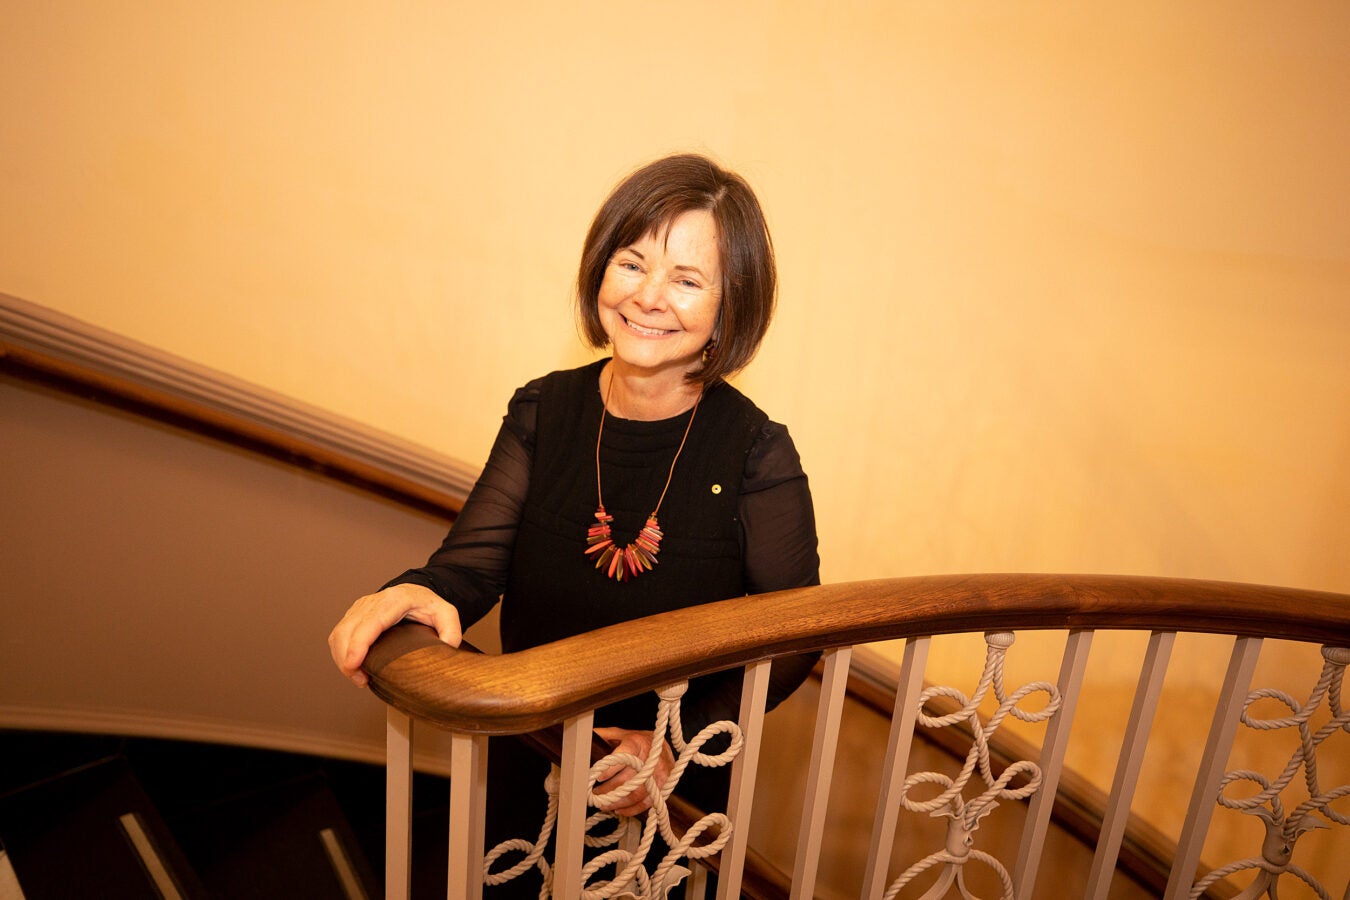 Geraldine Brooks poses on Houghton Library staircase.